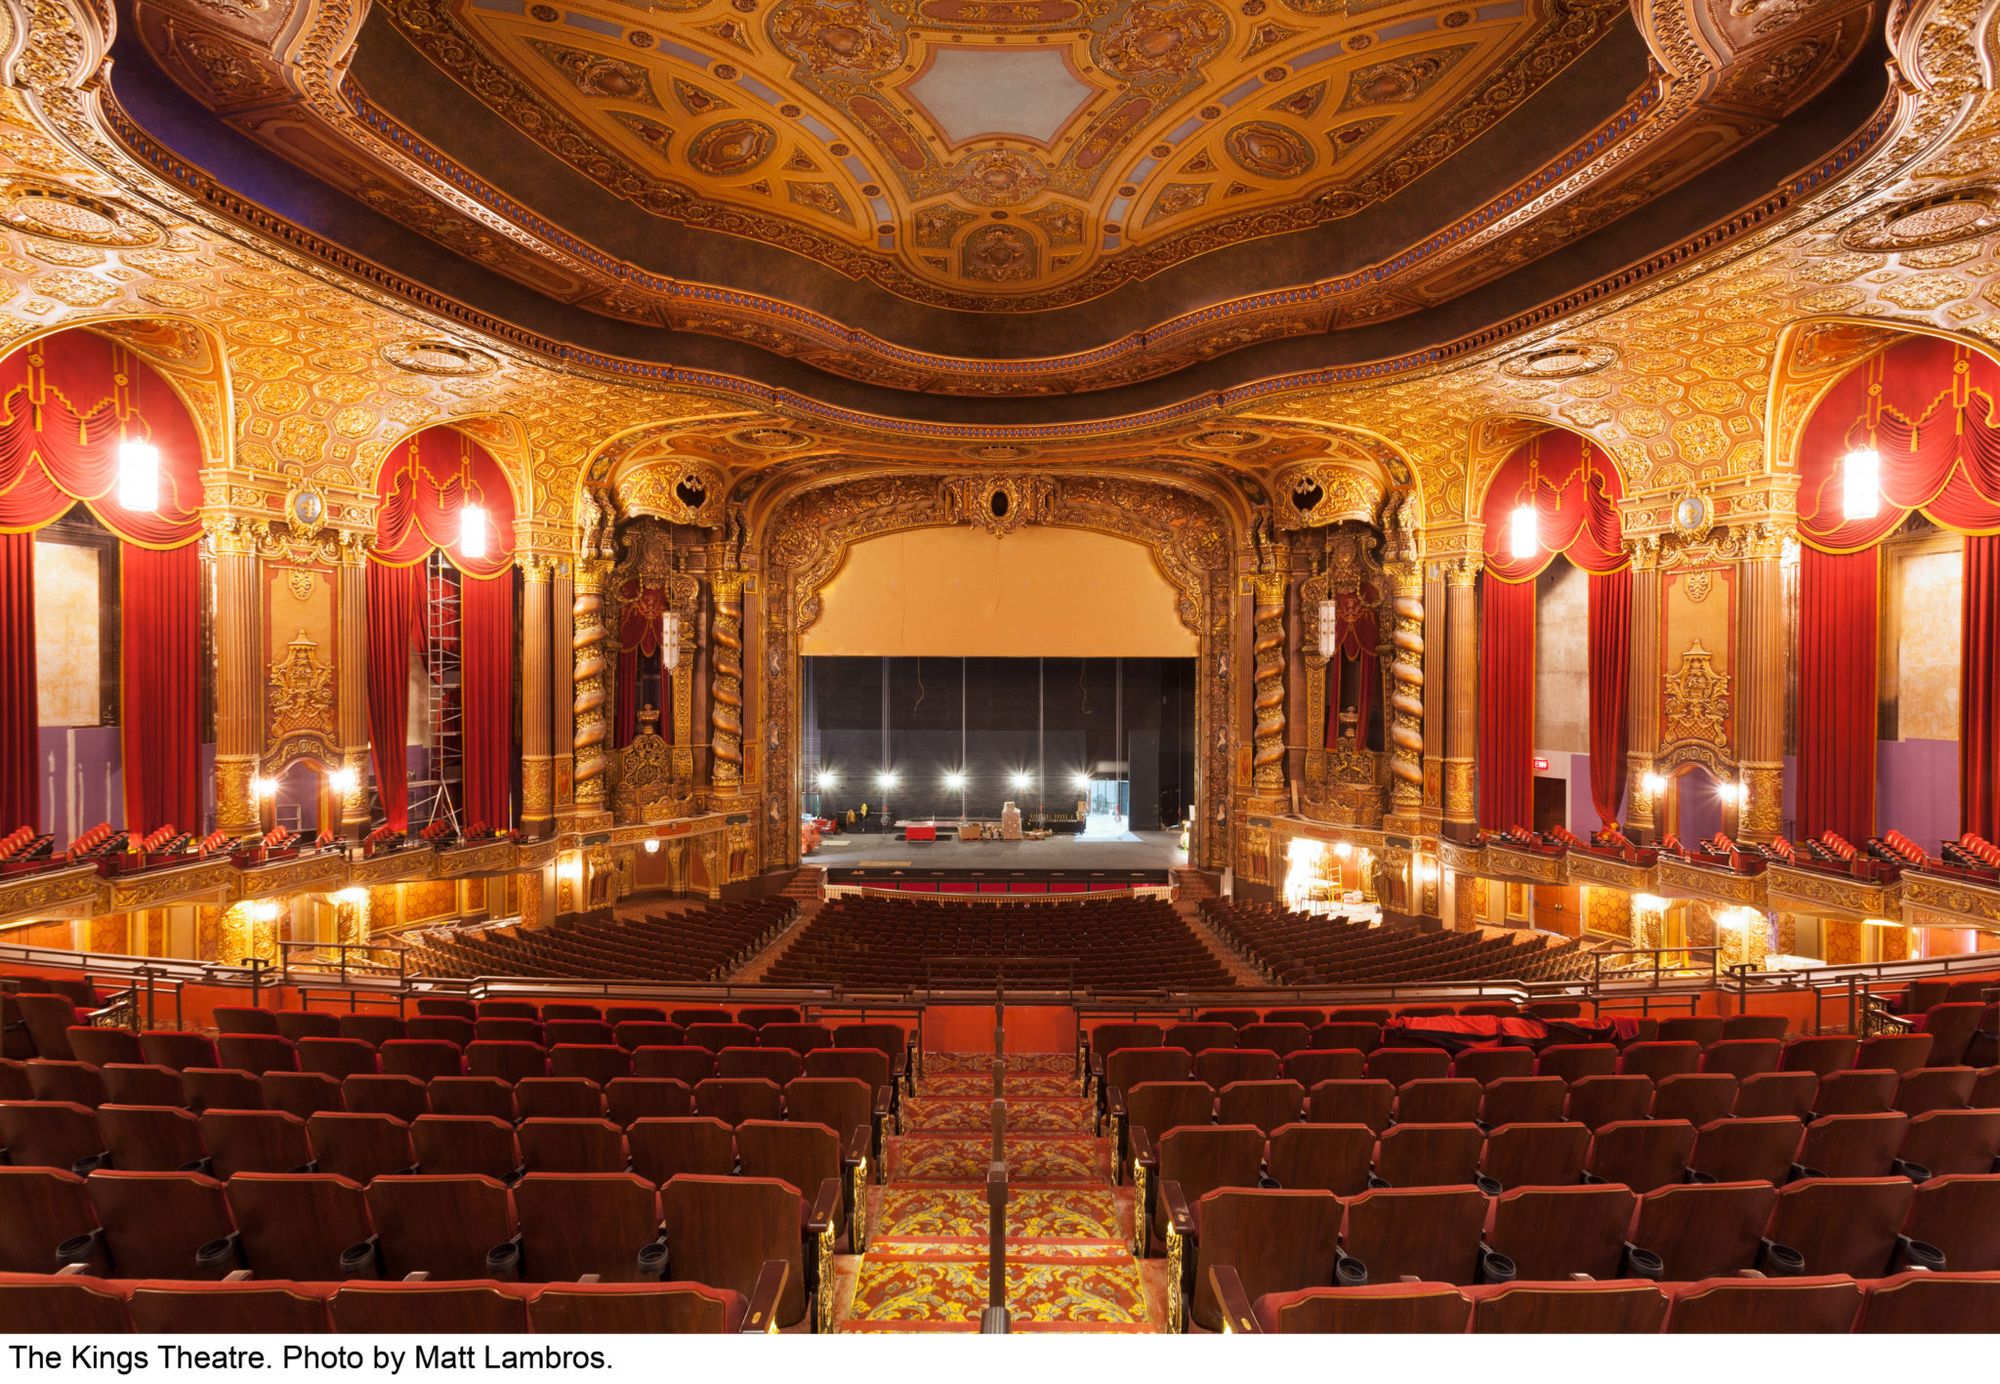 Updated: How To Request Free Tickets For A Performance At The Restored Kings Theatre